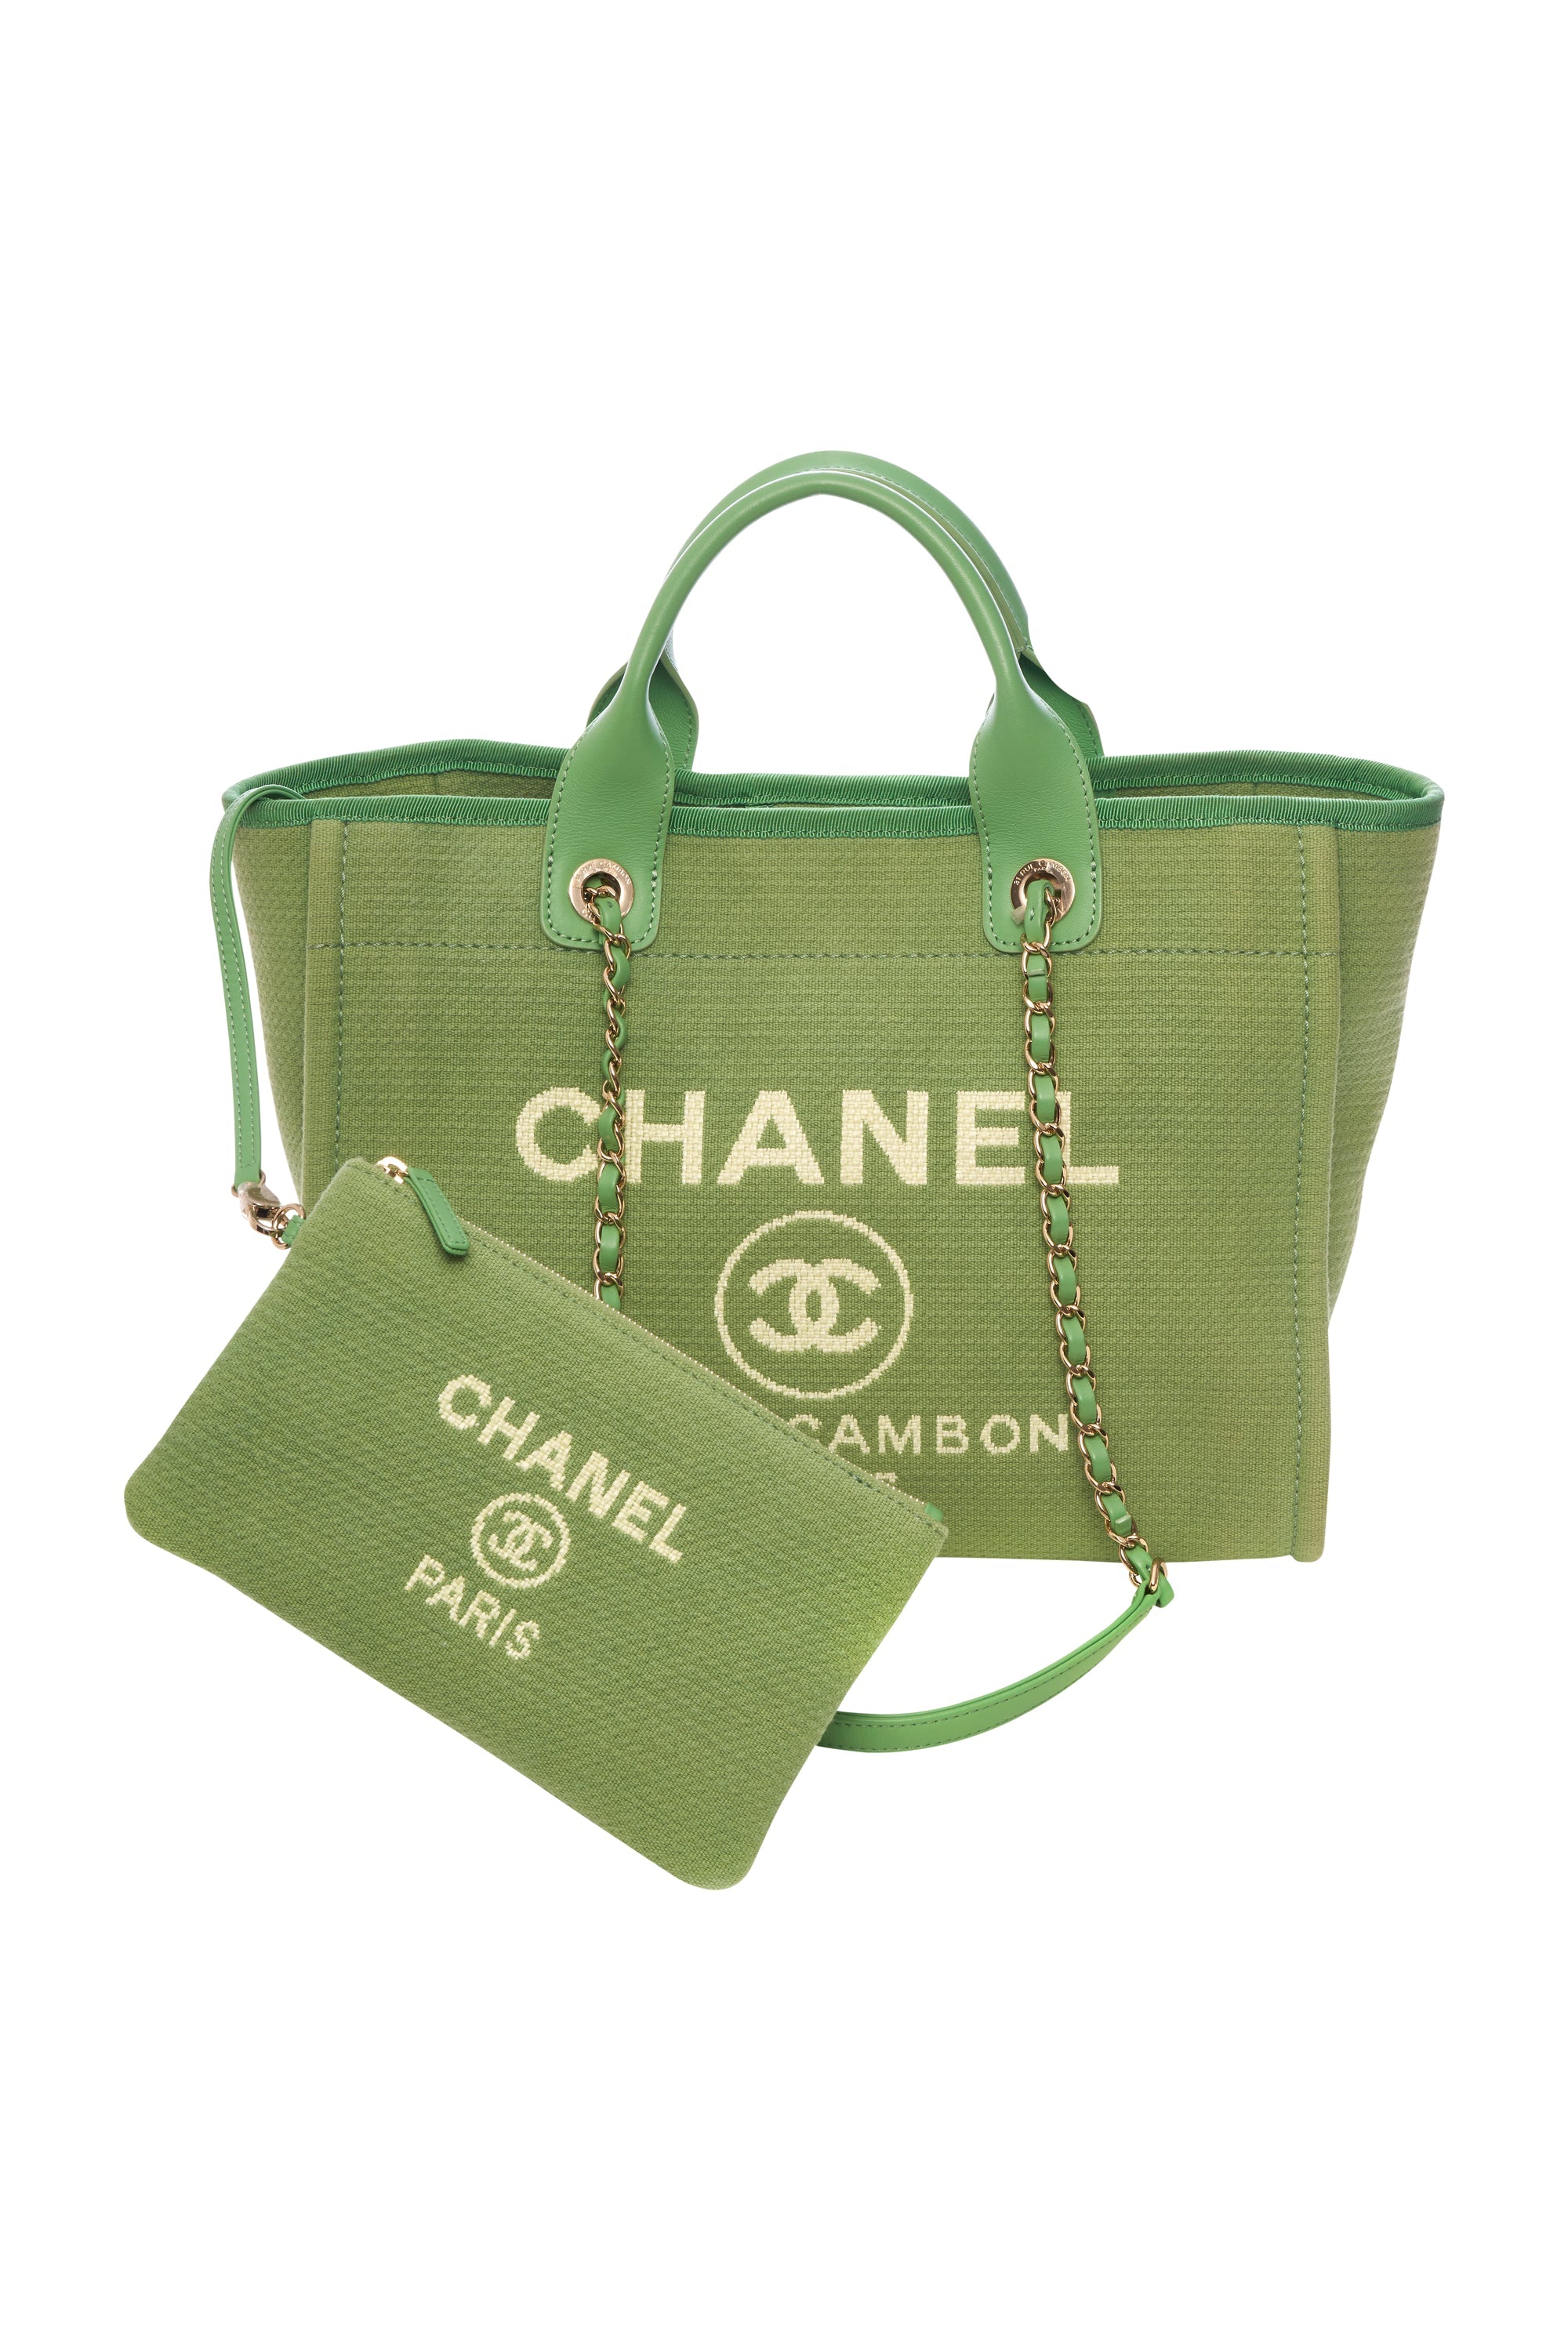 Chanel Green Deauville Tote Bag - Foxy Couture Carmel